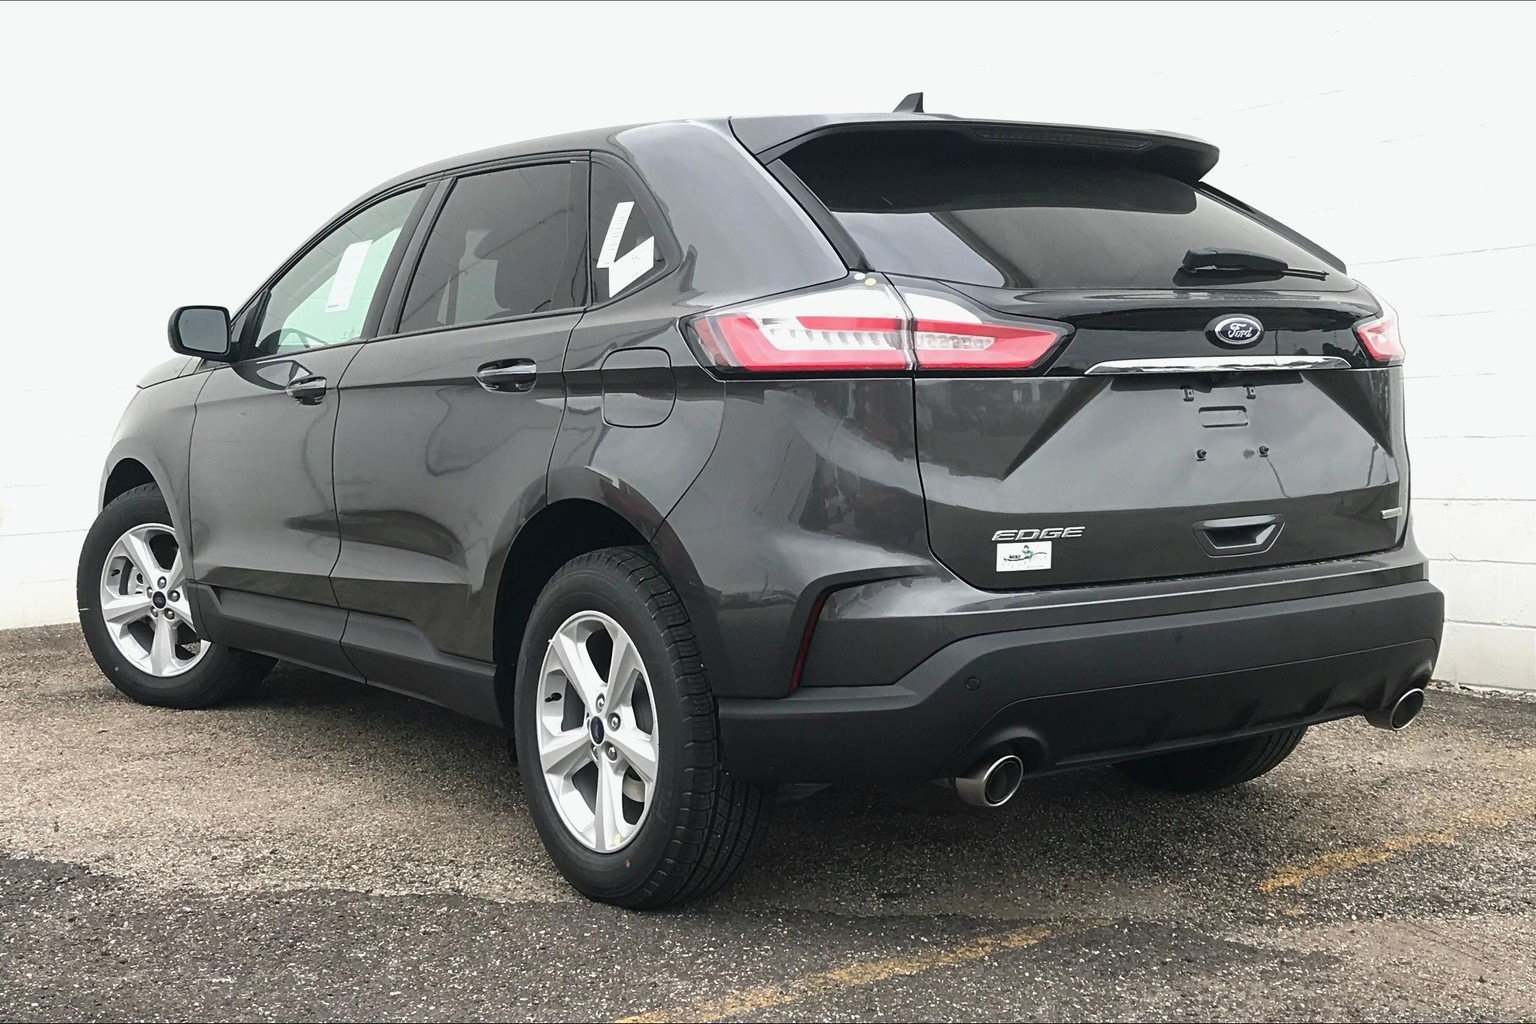 New 2020 Ford Edge SE 4D Sport Utility in Morton #A06582 | Mike Murphy Ford